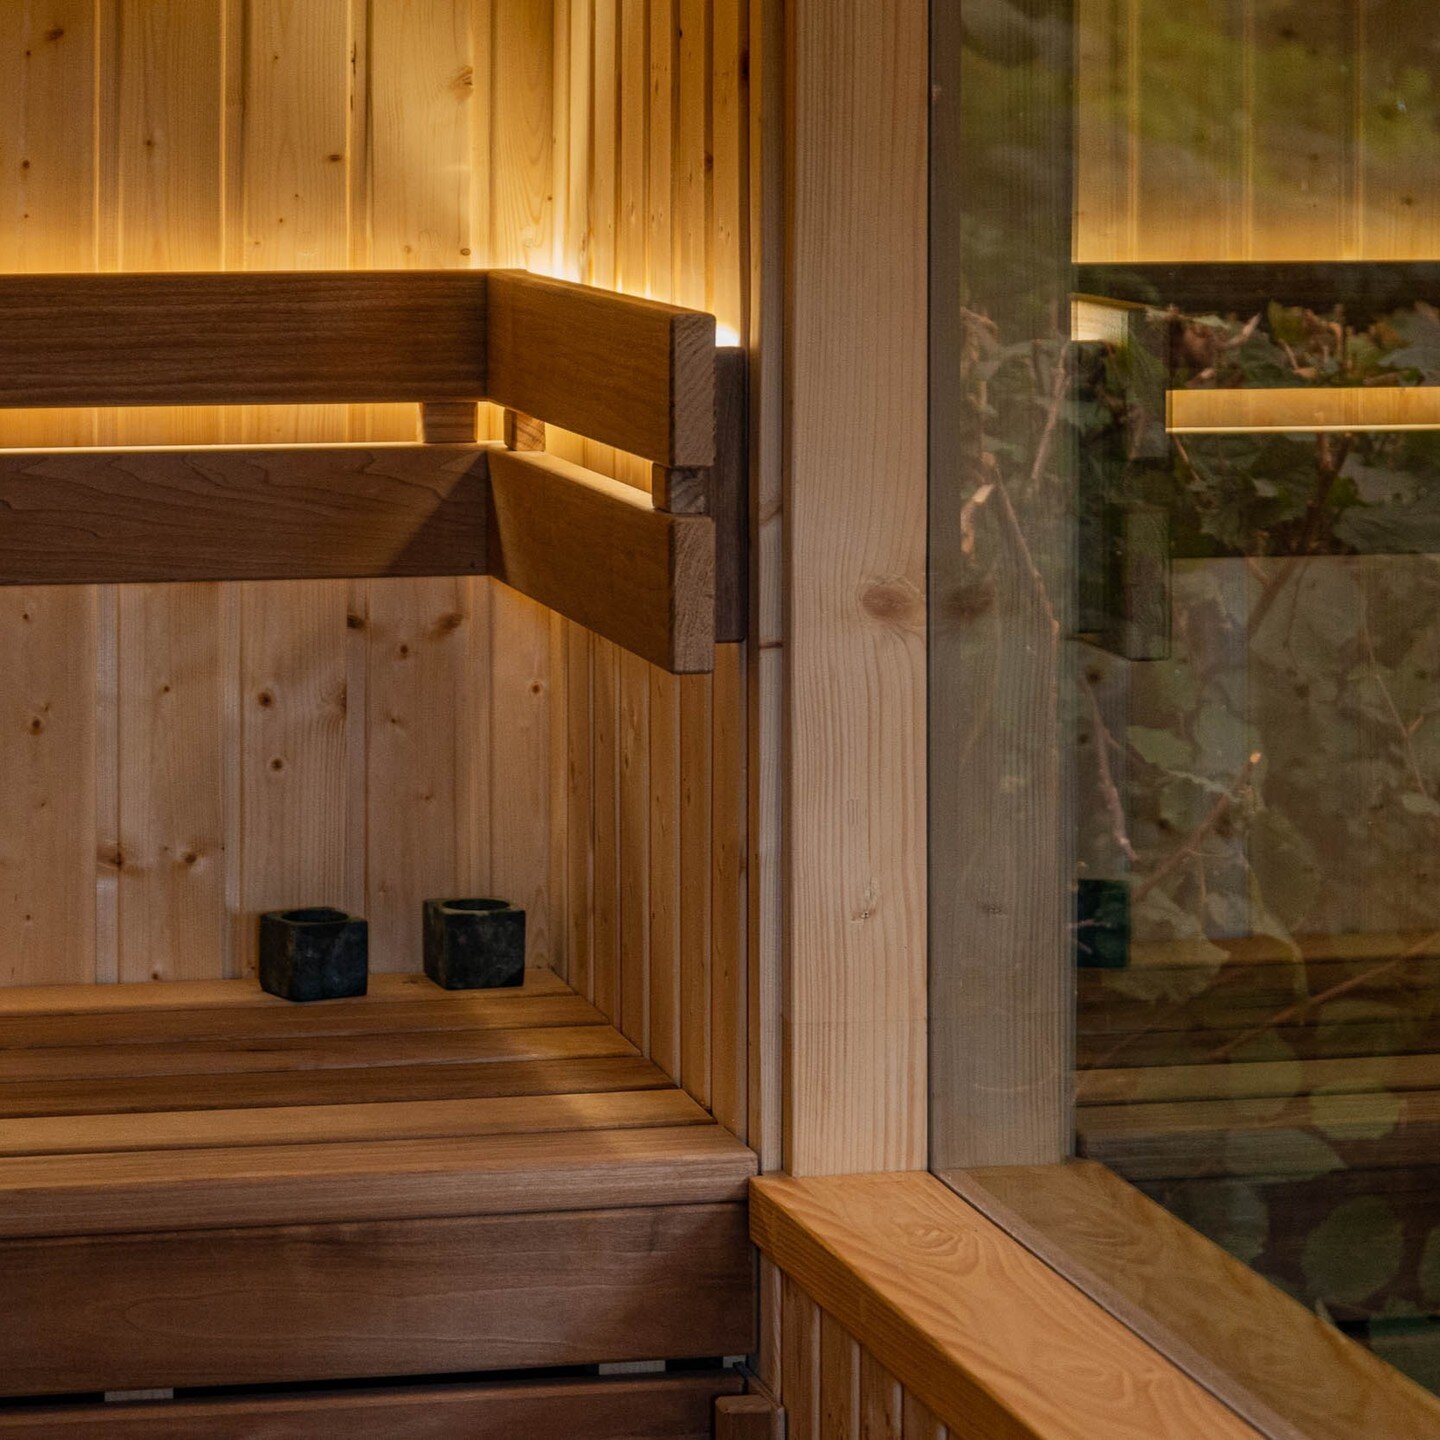 While we all have so much in common we are all on a slightly different wellness journey with different needs.

Just like all shoes are not all the same size, why would you buy a generic sauna? 

We enjoy adjusting our therapeutic environments to suit